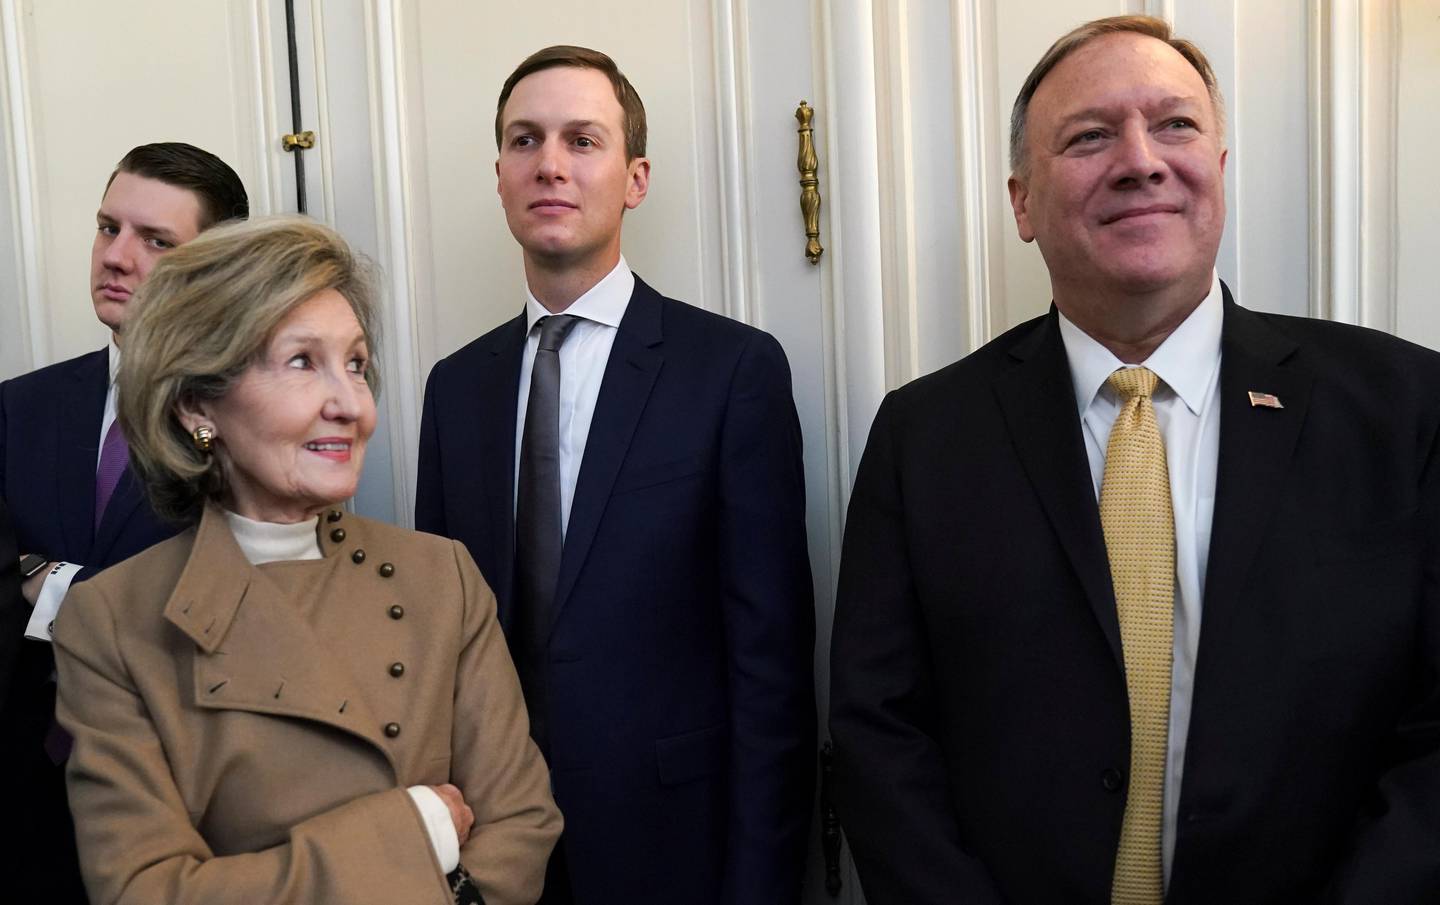 U.S. Ambassador to NATO Kay Bailey Hutchison looks at U.S. Secretary of State Mike Pompeo next to White House senior advisor Jared Kushner during the meeting of U.S. President Donald Trump and NATO Secretary General Jens Stoltenberg, ahead of the NATO summit in Watford, in London, Britain, December 3, 2019. REUTERS/Kevin Lamarque